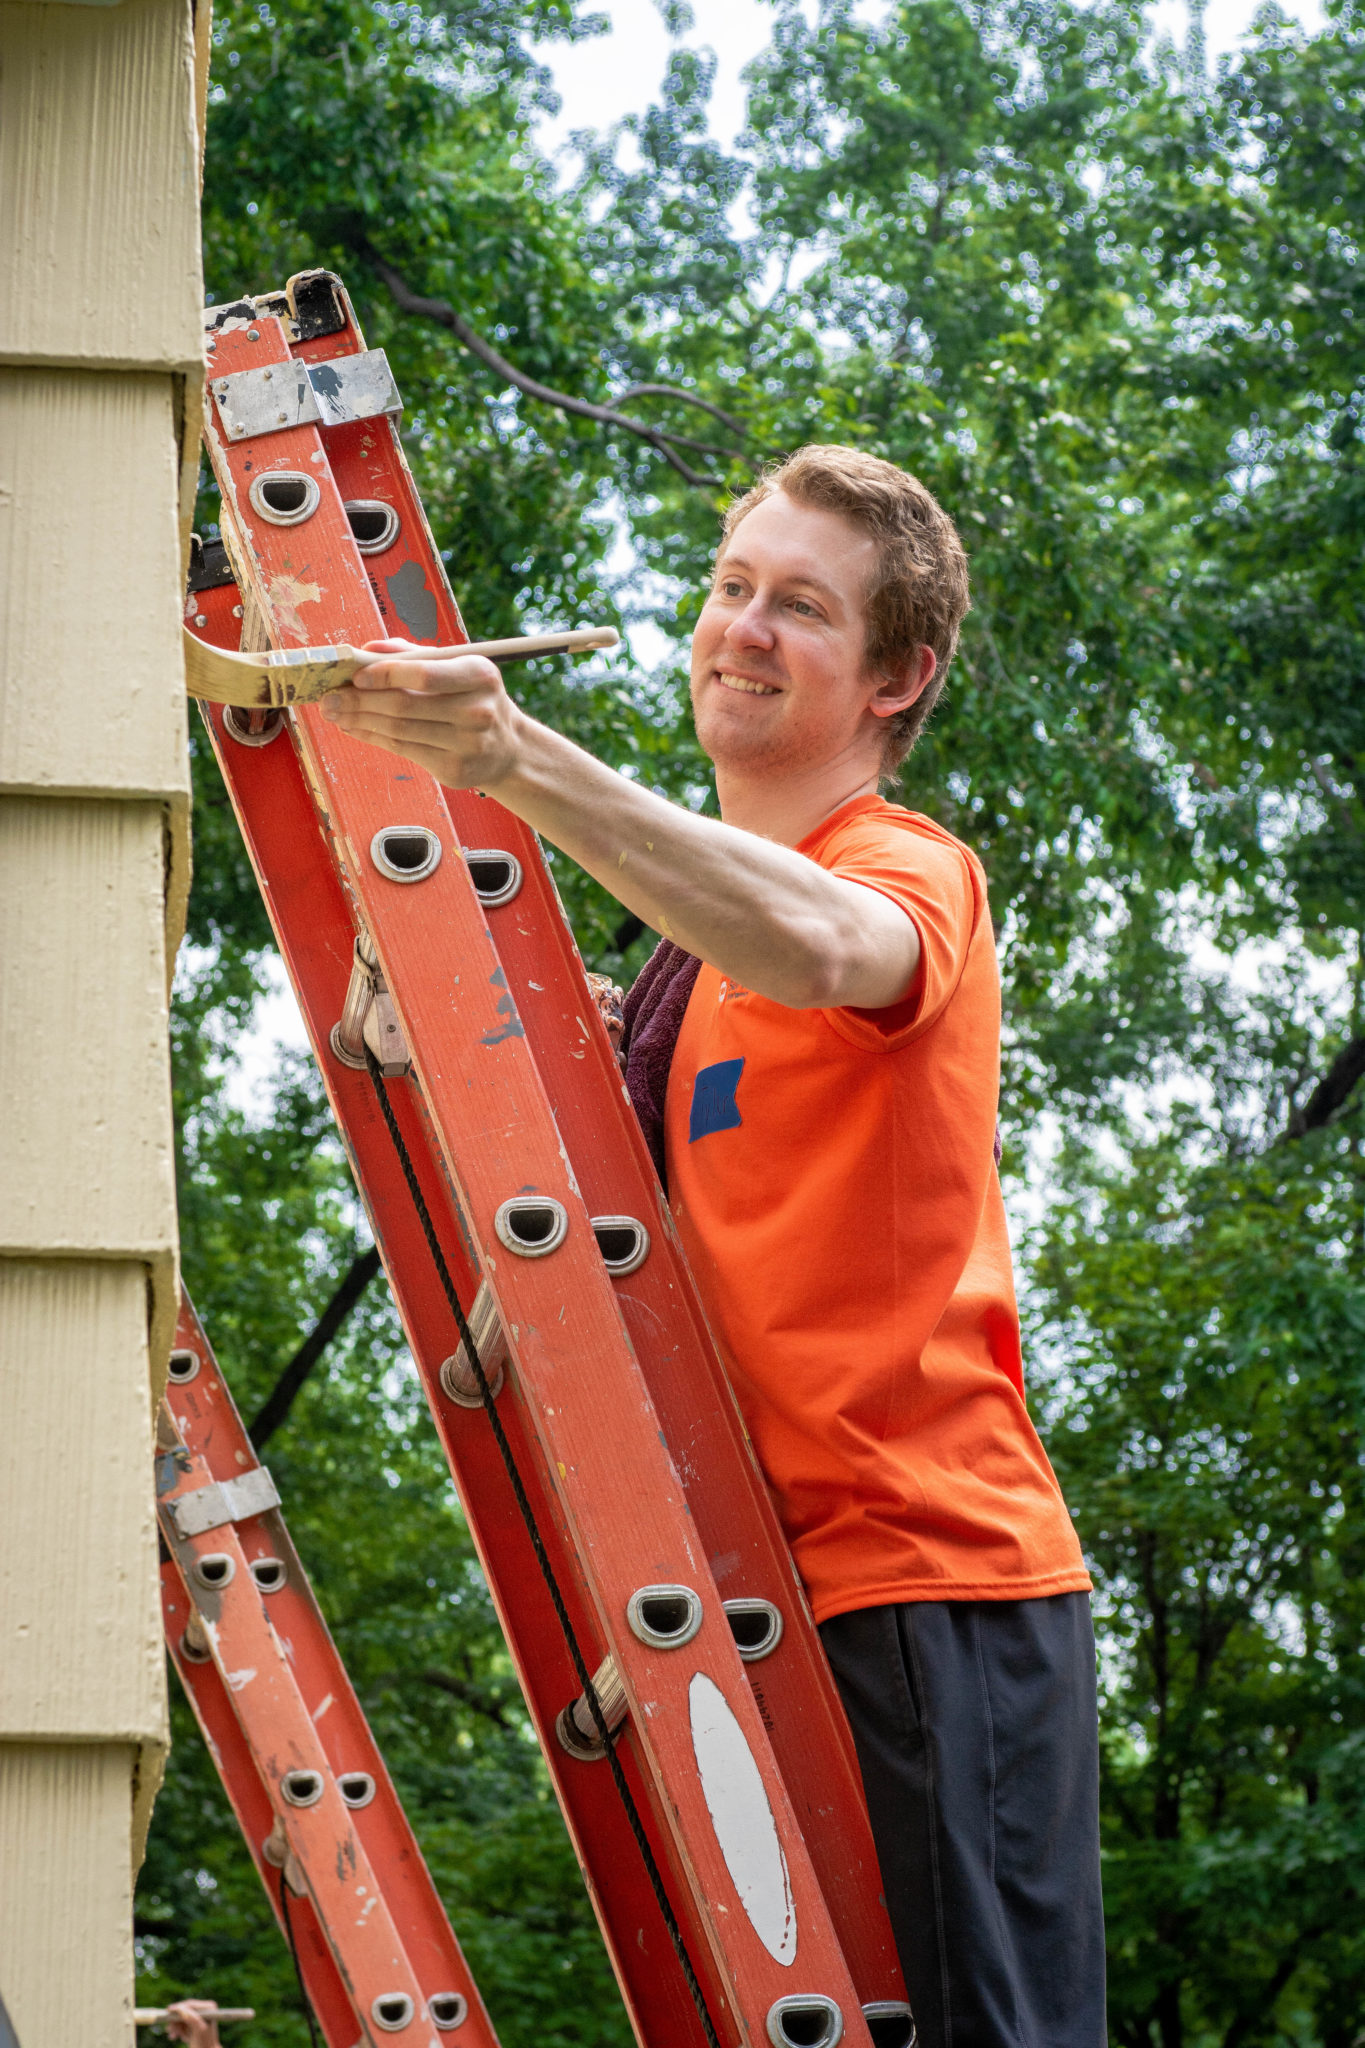 a man in an orange shirt is painting a house